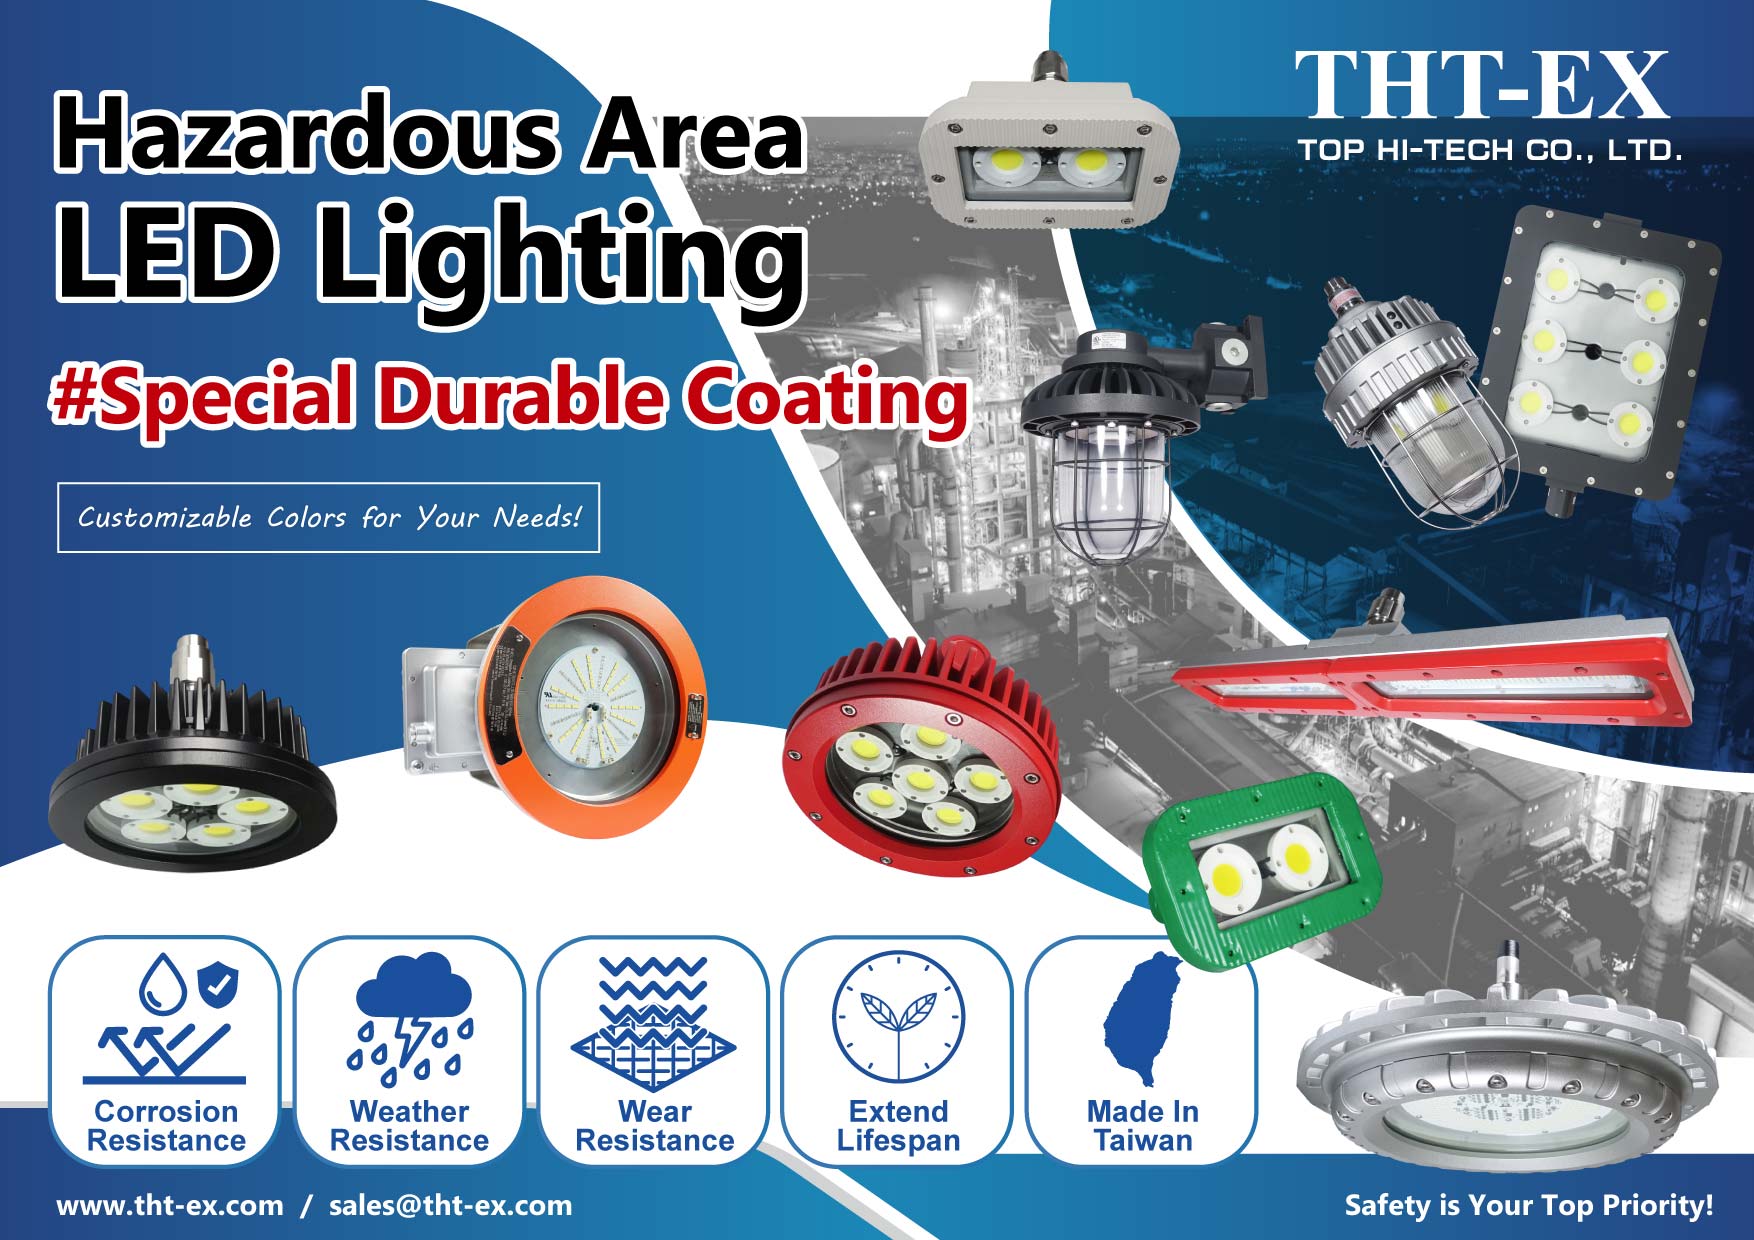 Benefits of Coating for Explosion-Proof Lighting